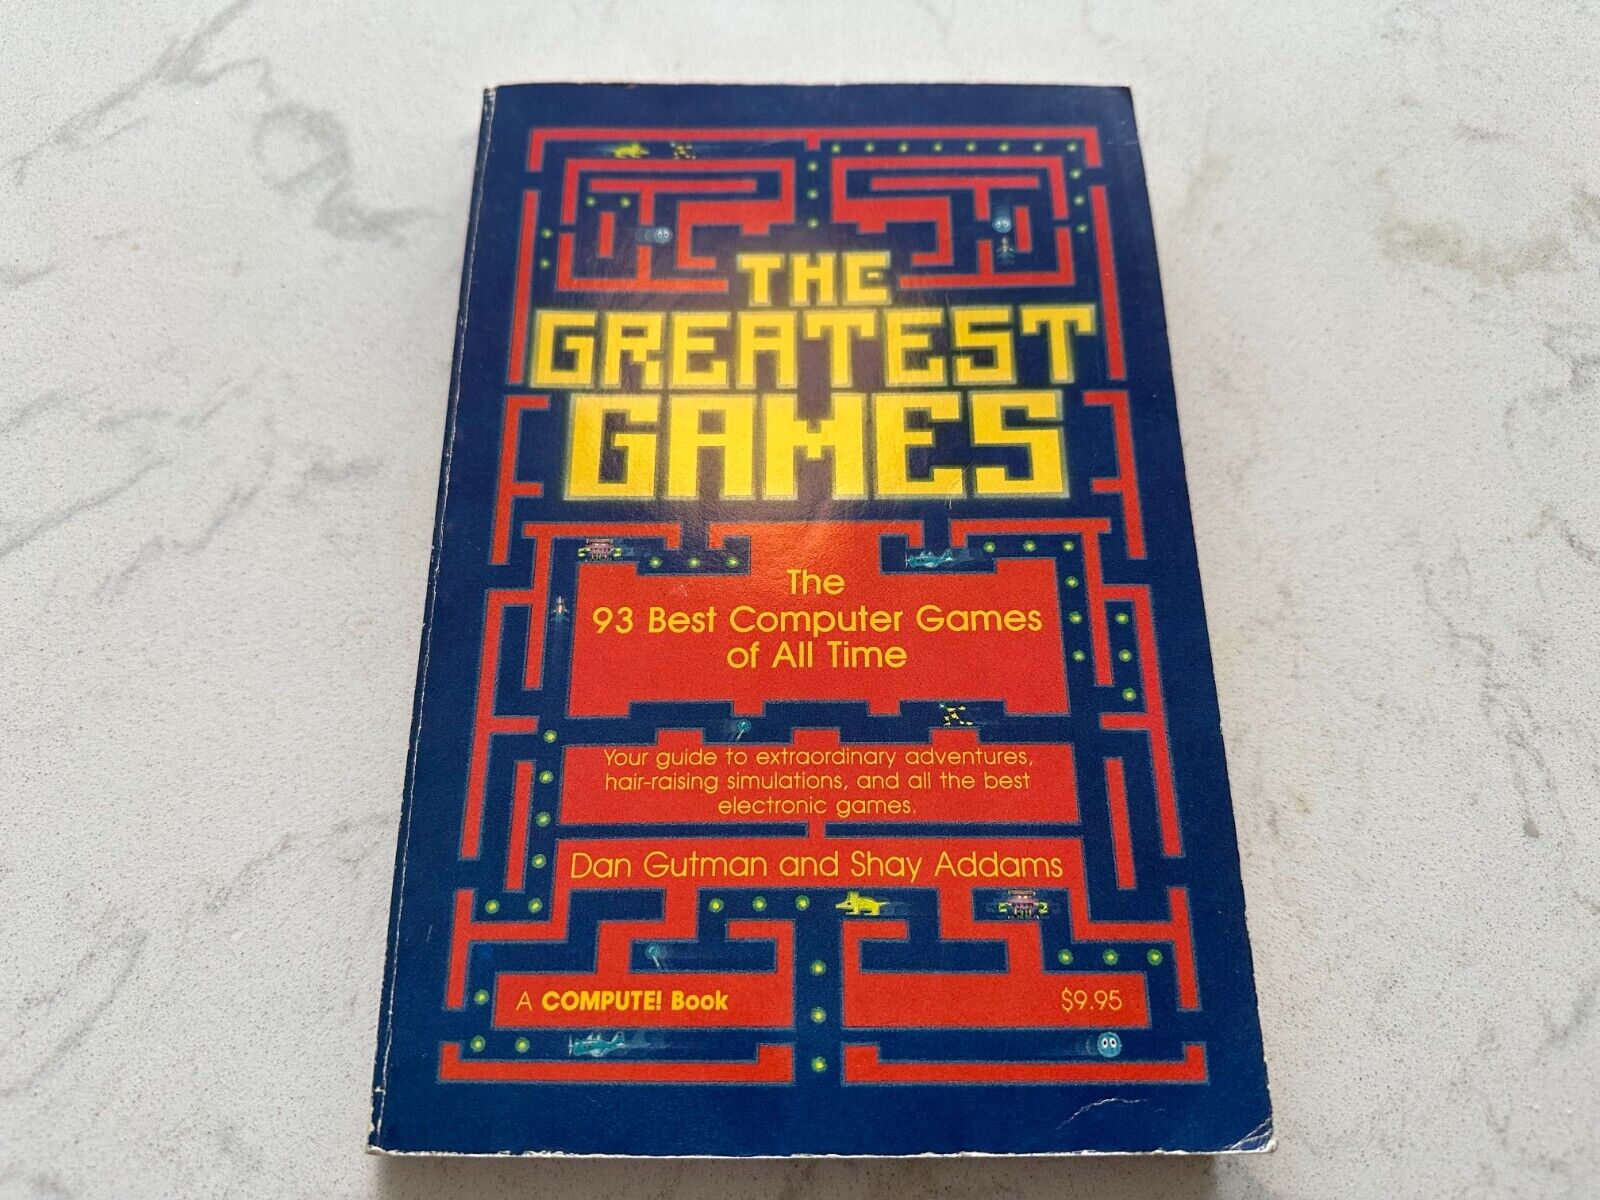 The Greatest Games The 93 Best Computer Games of All Time Vintage Book